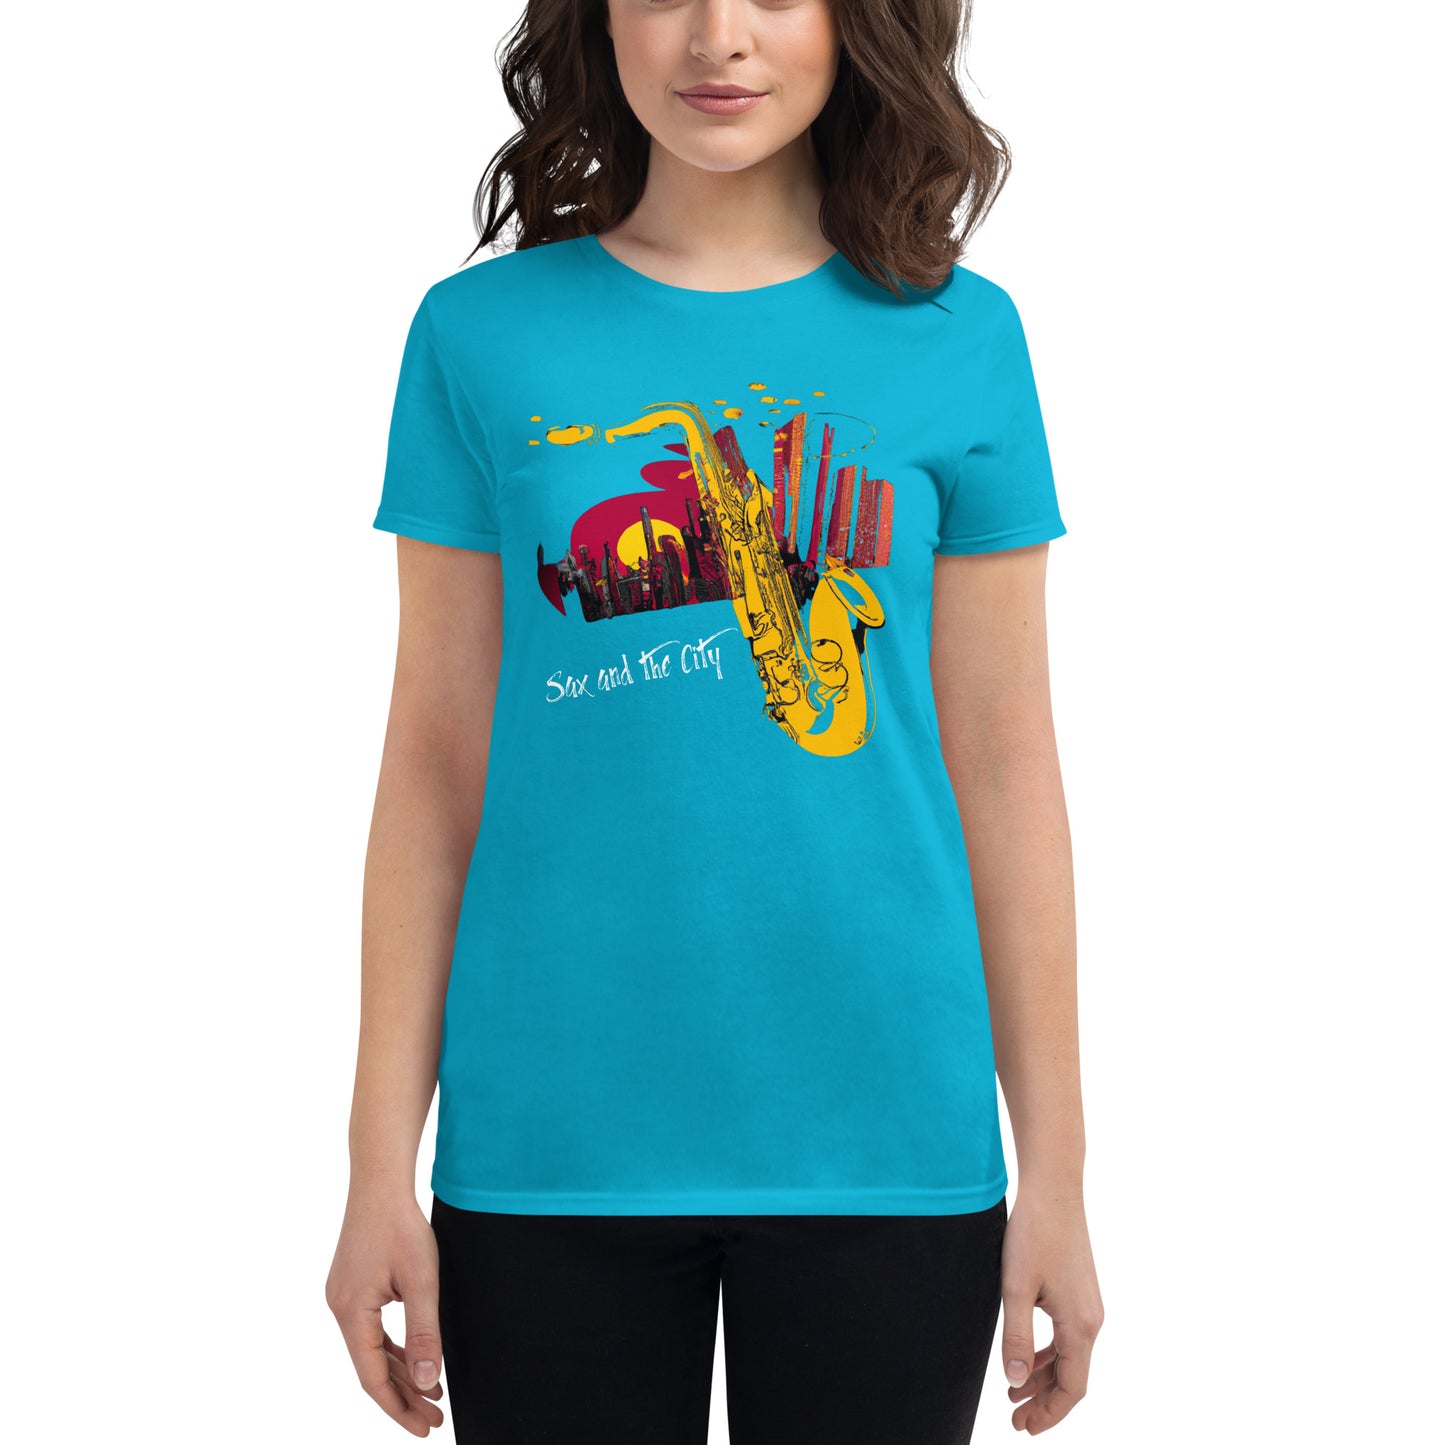 Sax and The City Women's short sleeve t-shirt